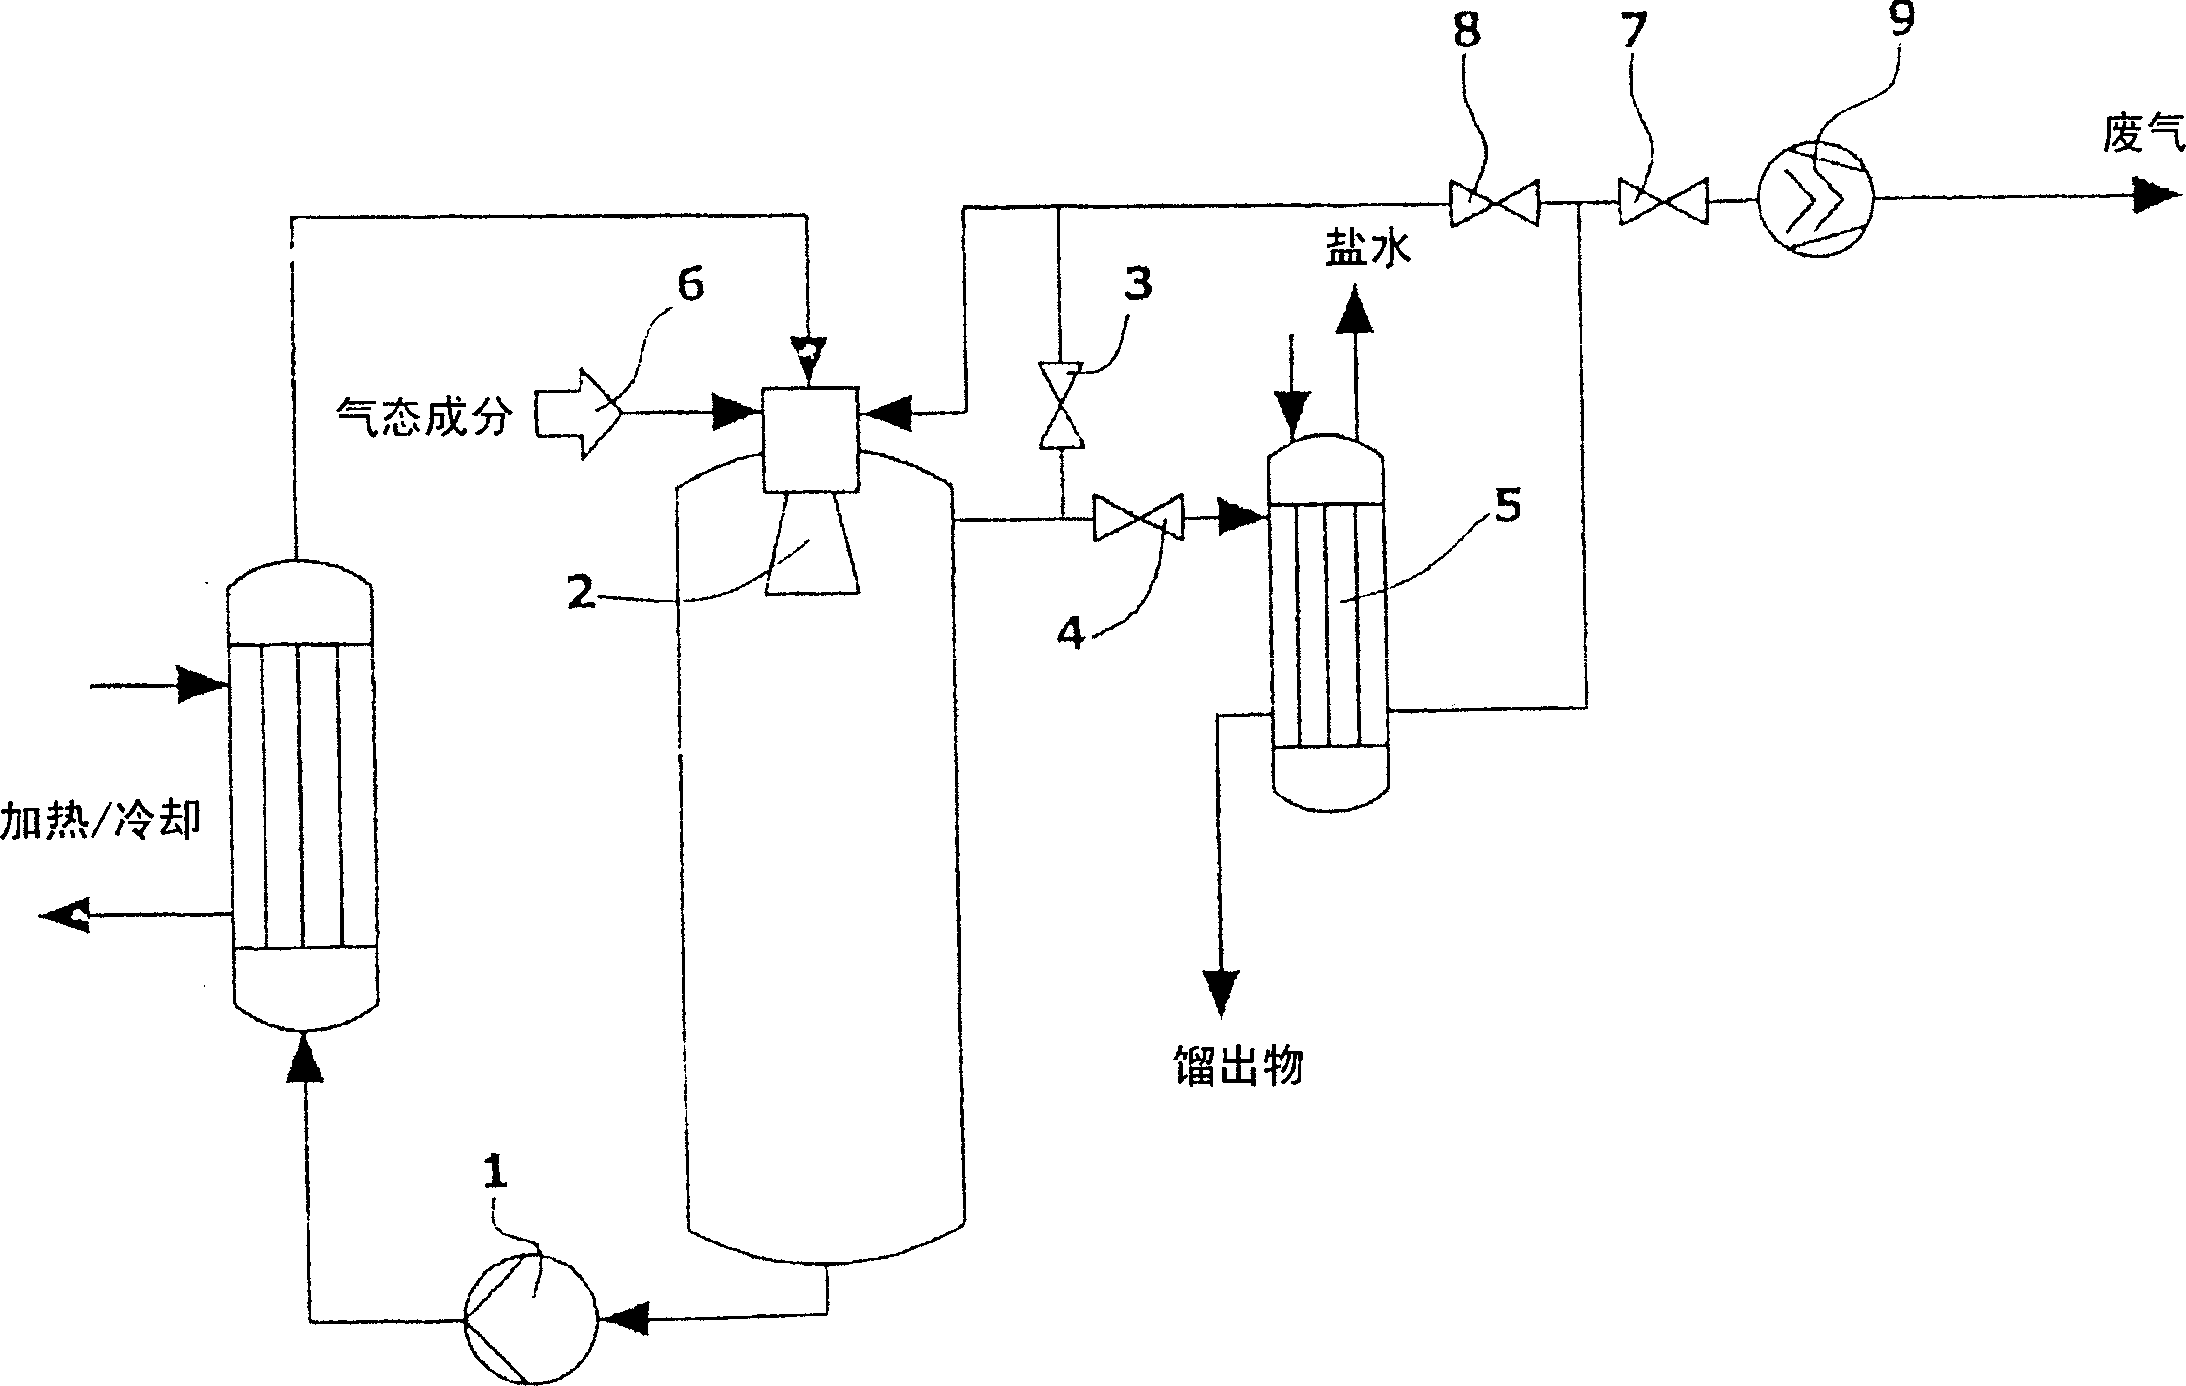 Equilibrium reactions and gas/liquid reaction in a loop reactor